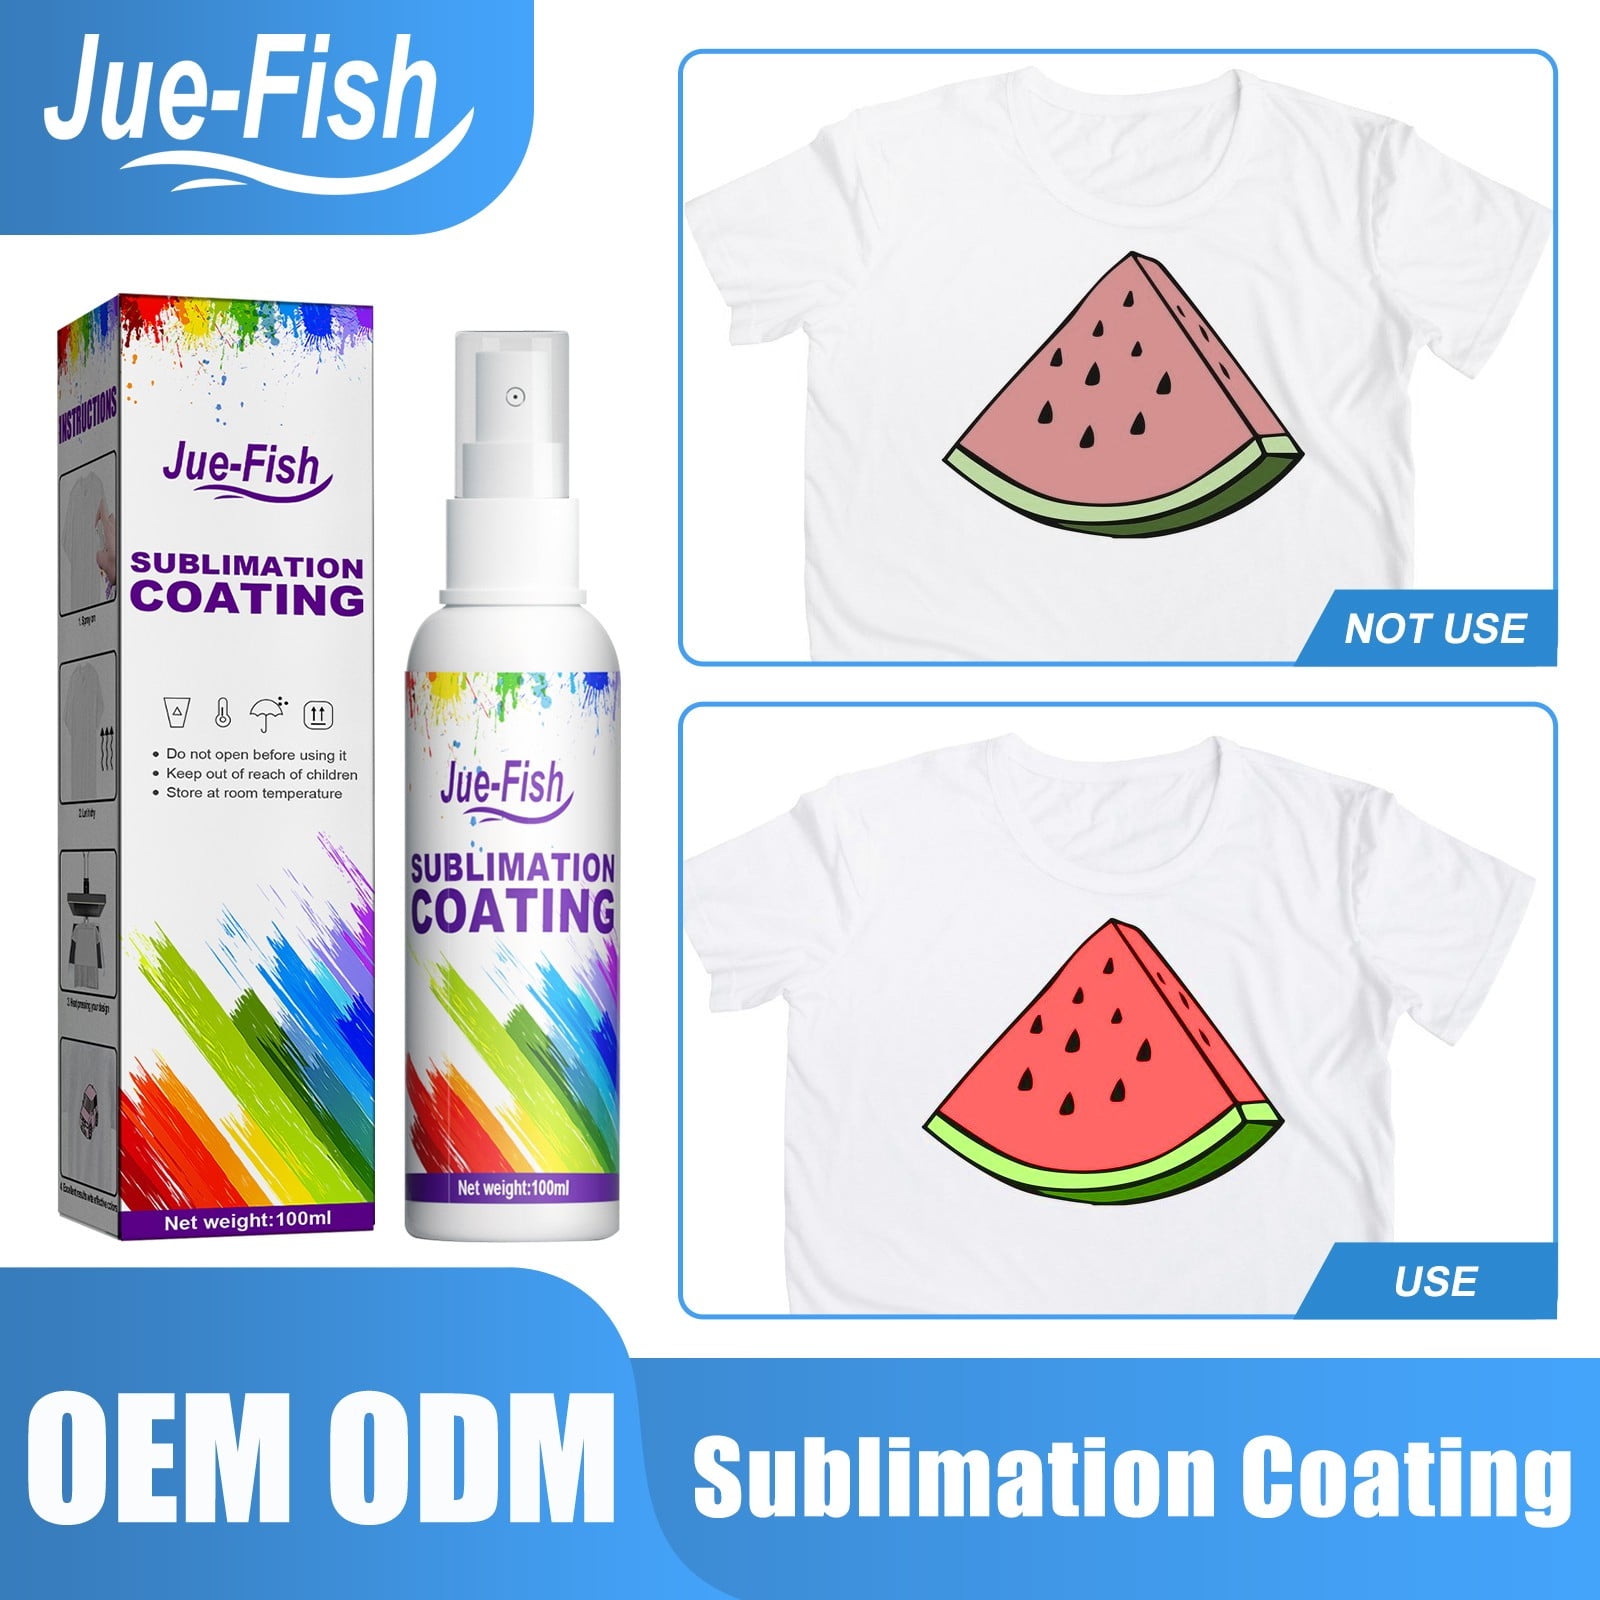 Sublimation Spray for Cotton Shirts, 2x100ml Sublimation Coating Spray for All Fabric Including Carton,Polyester,Canva,T-Shirts - Quick Dry & High